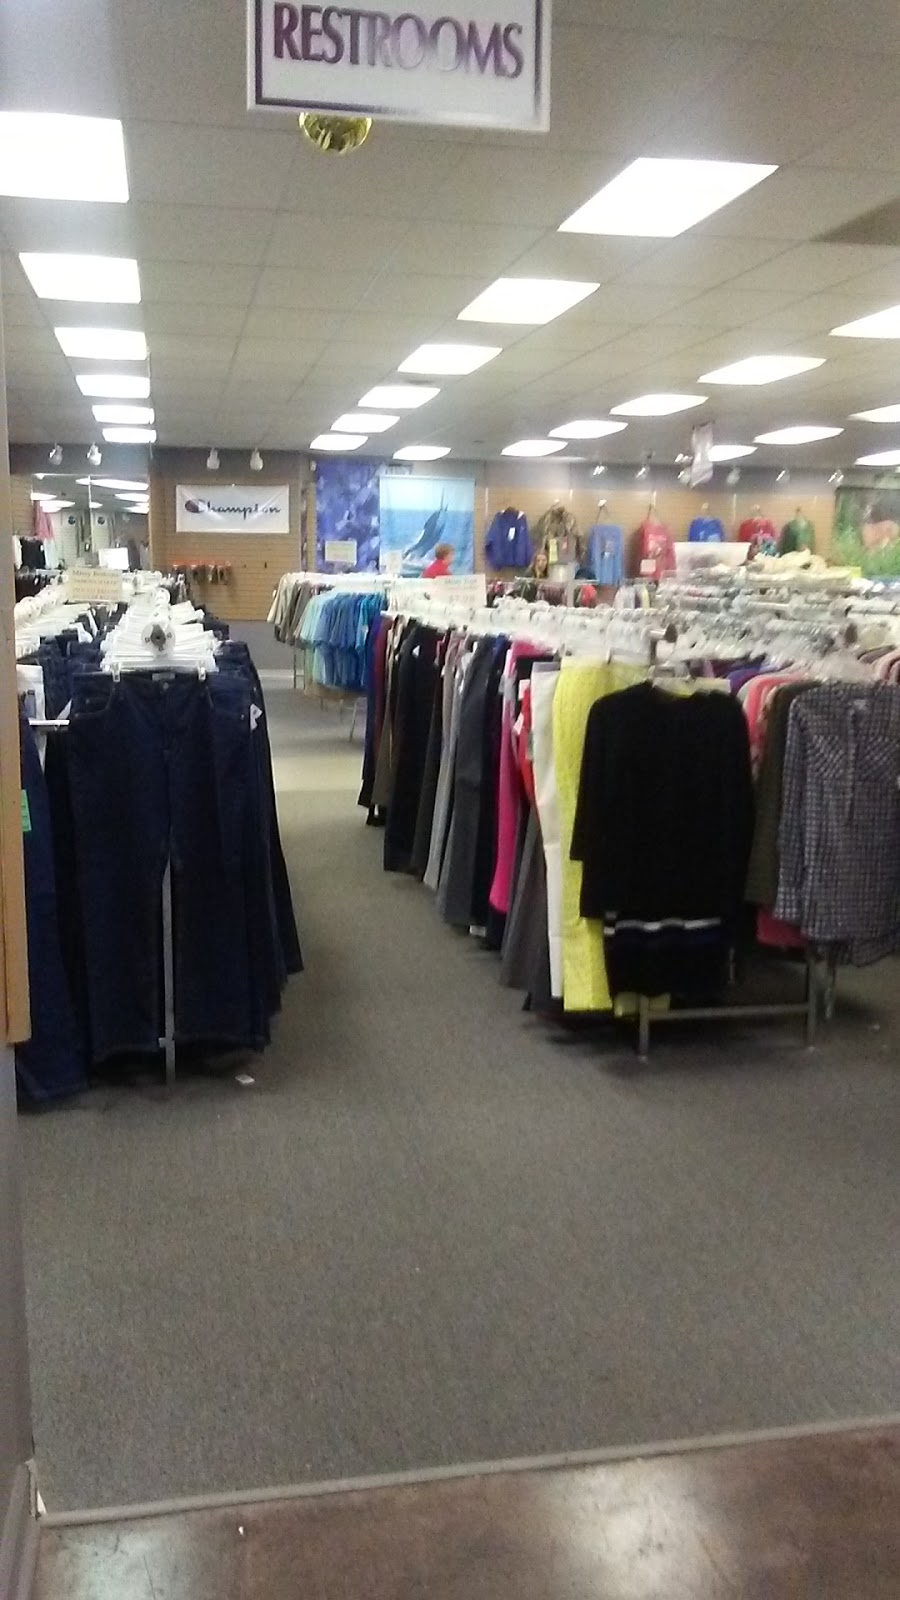 Clothes Wearhouse | 1640 U.S. Hwy 64 W, Asheboro, NC 27205, USA | Phone: (336) 629-1090